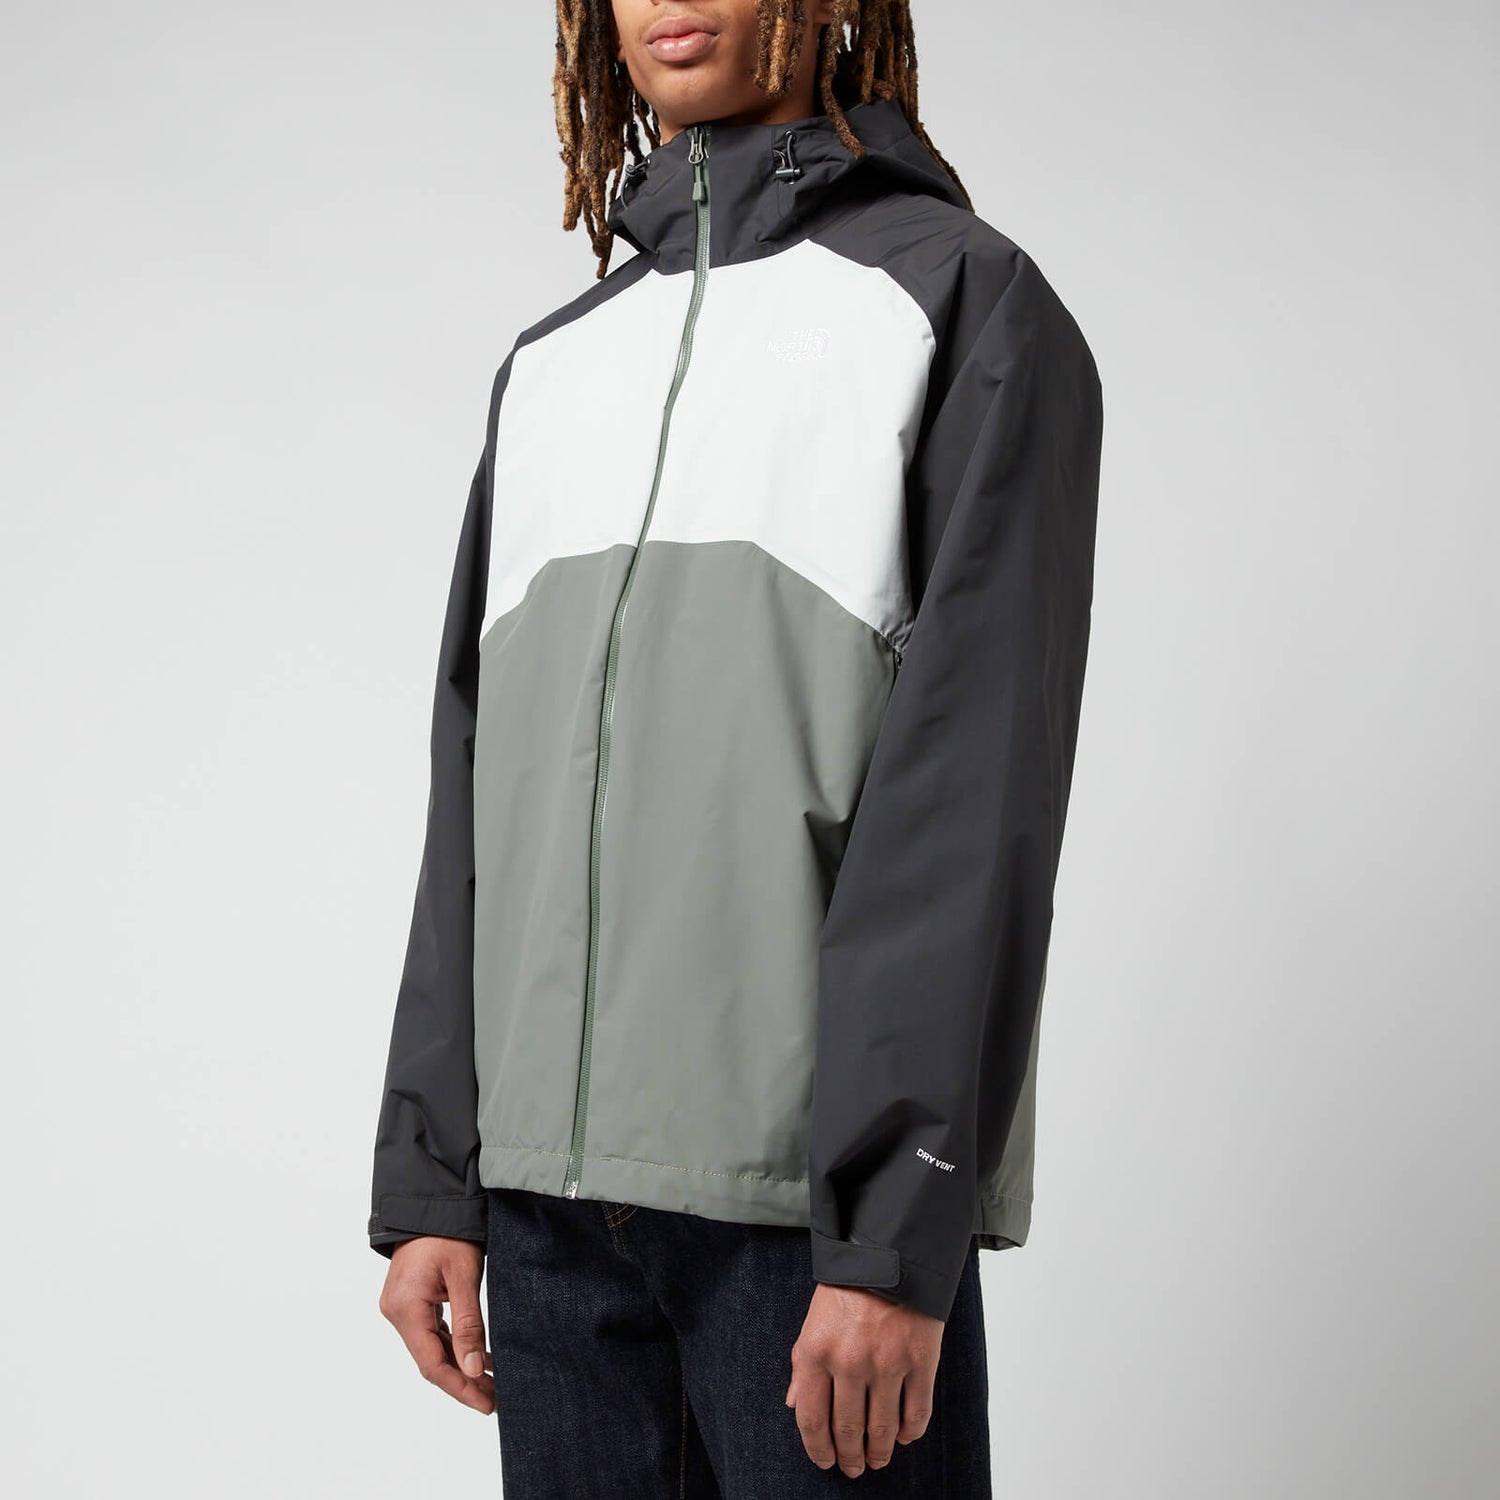 The North Face Men's Stratos Jacket - Green/White/Black - S